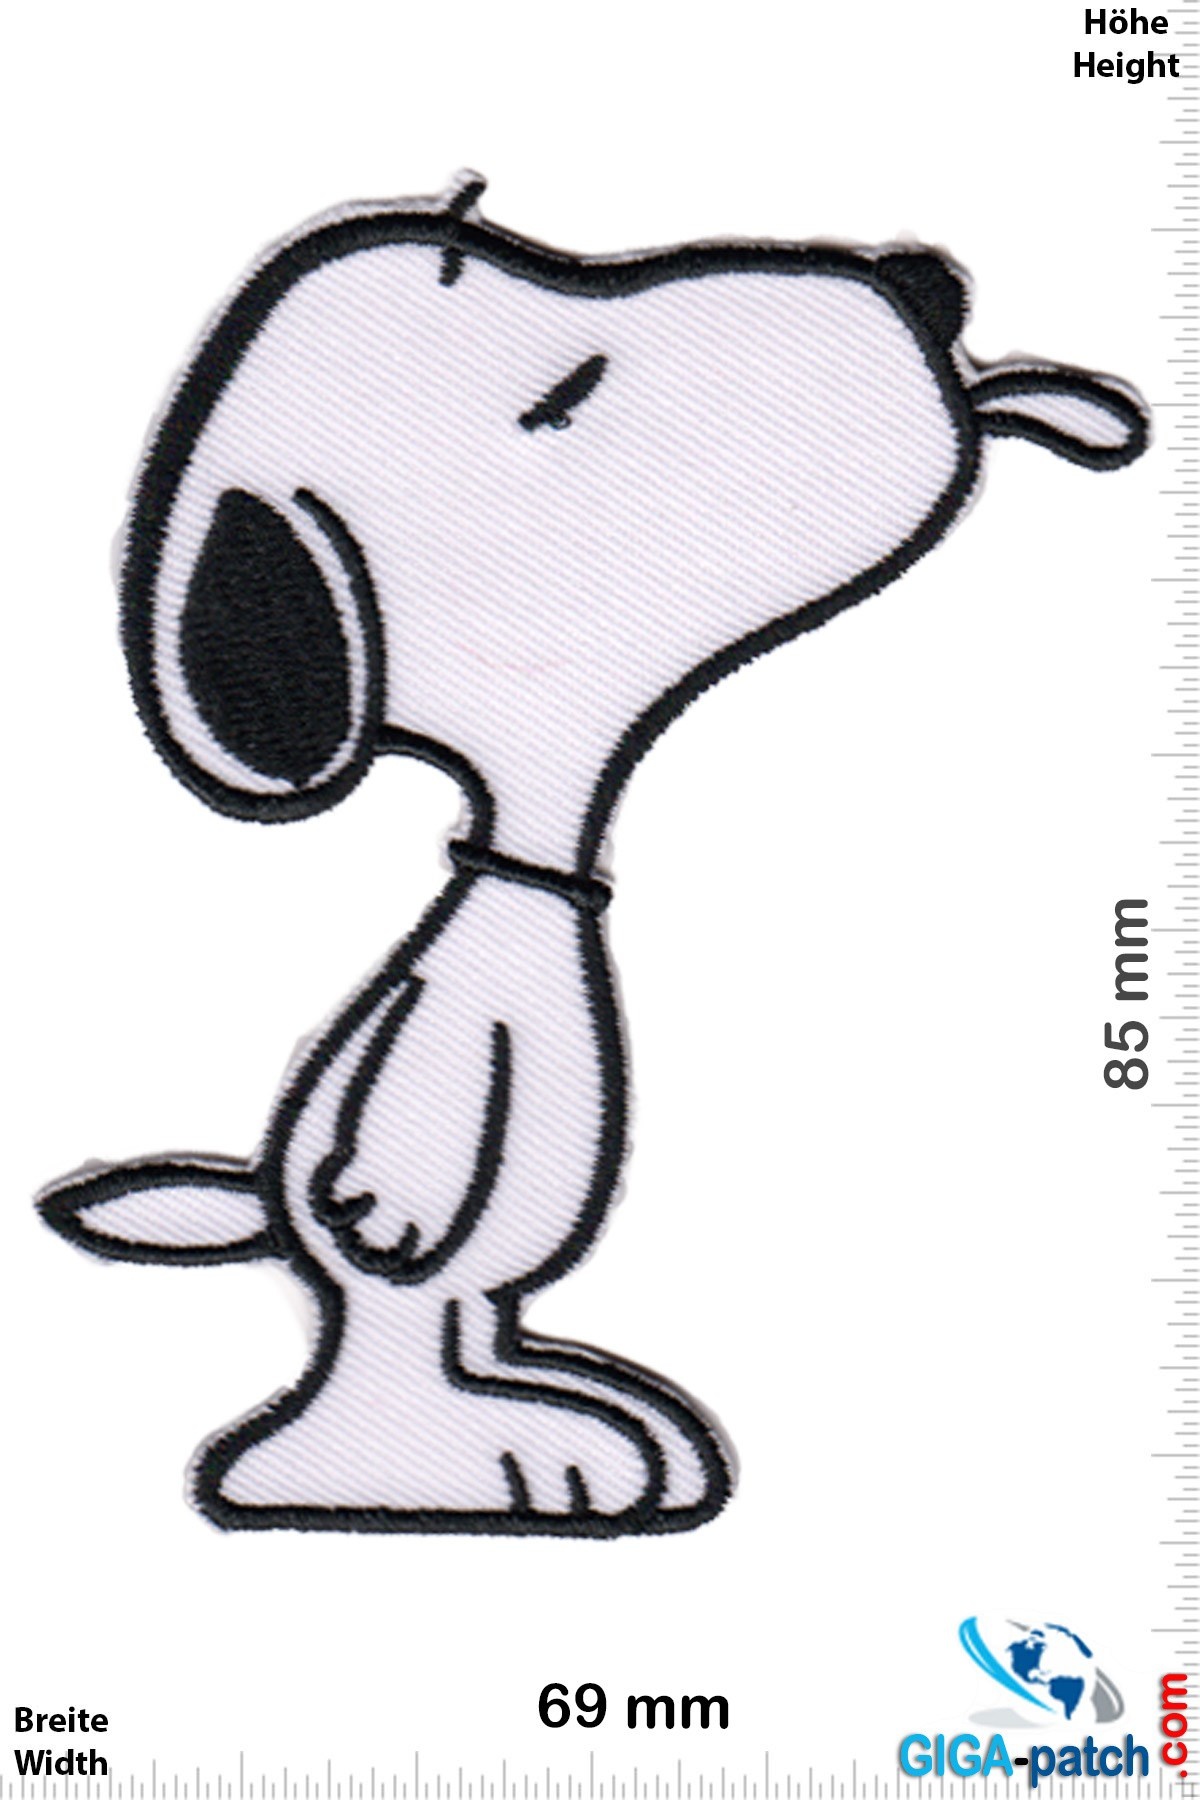 https://cdn.webshopapp.com/shops/103628/files/355436099/snoopy-snoopy-stick-out-tongue-die-peanuts.jpg